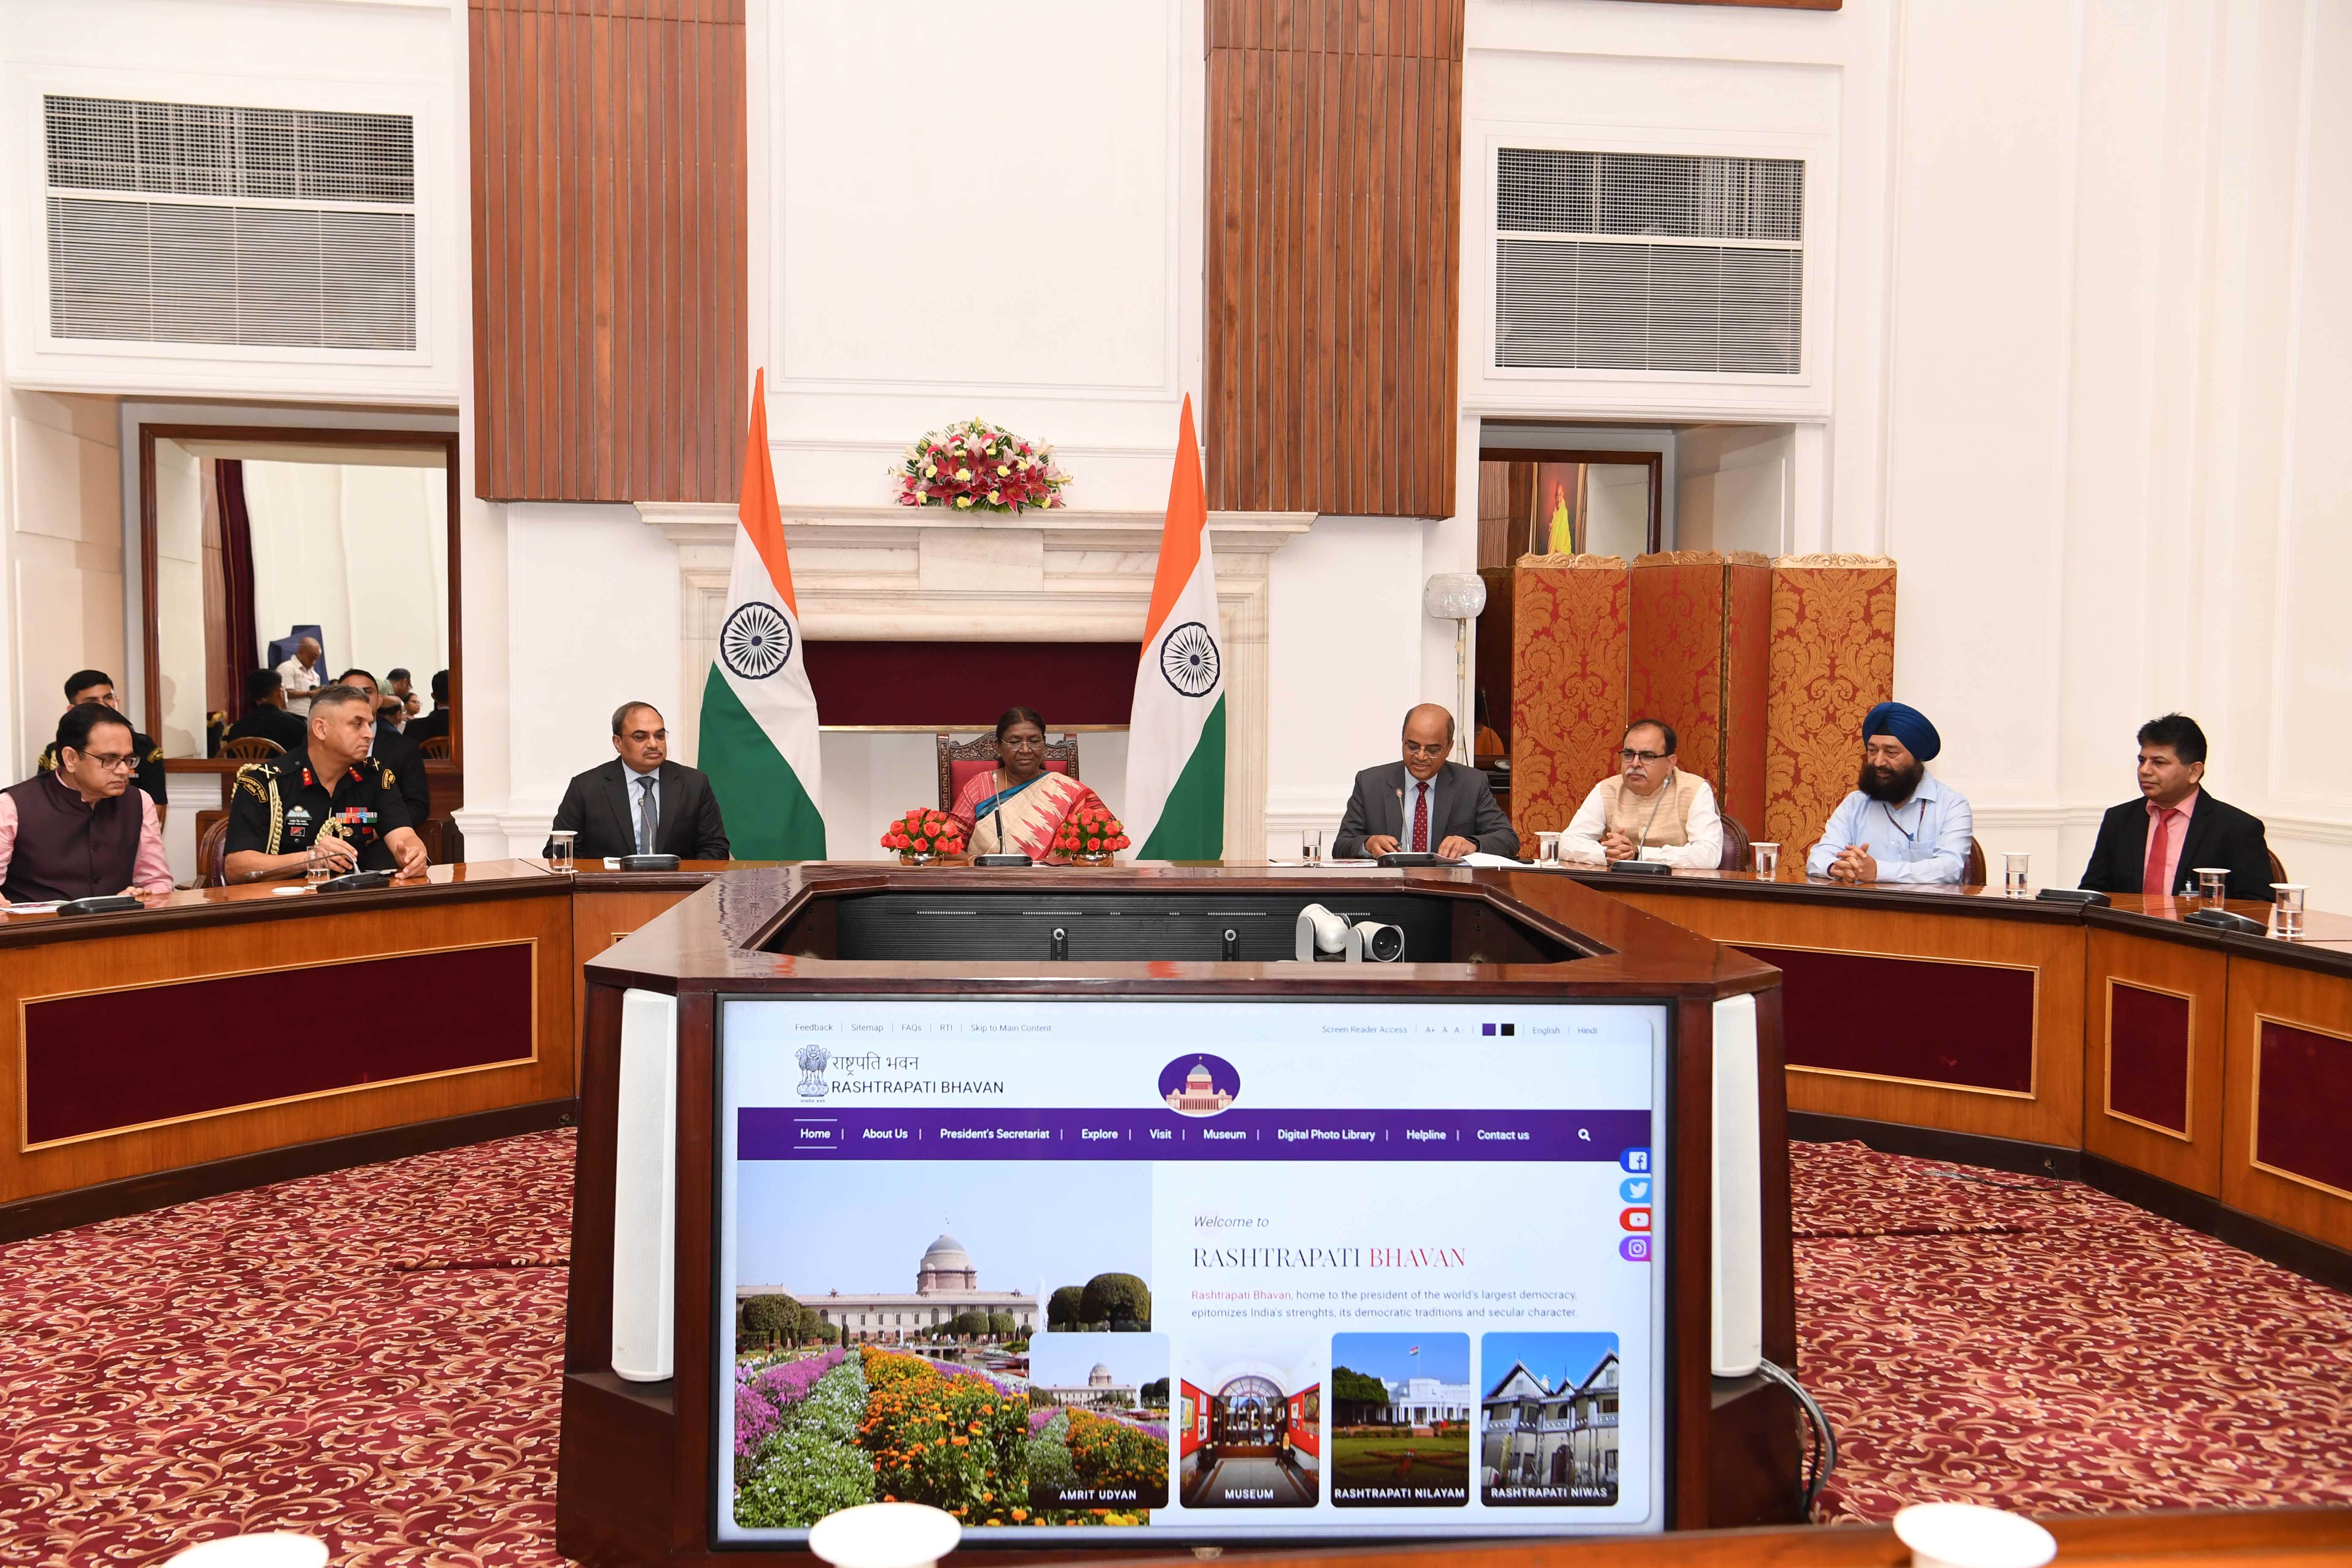 The President of India, Smt Droupadi Murmu Launched the redeveloped website of the President of India and Rashtrapati Bhavan on July 25, 2023.